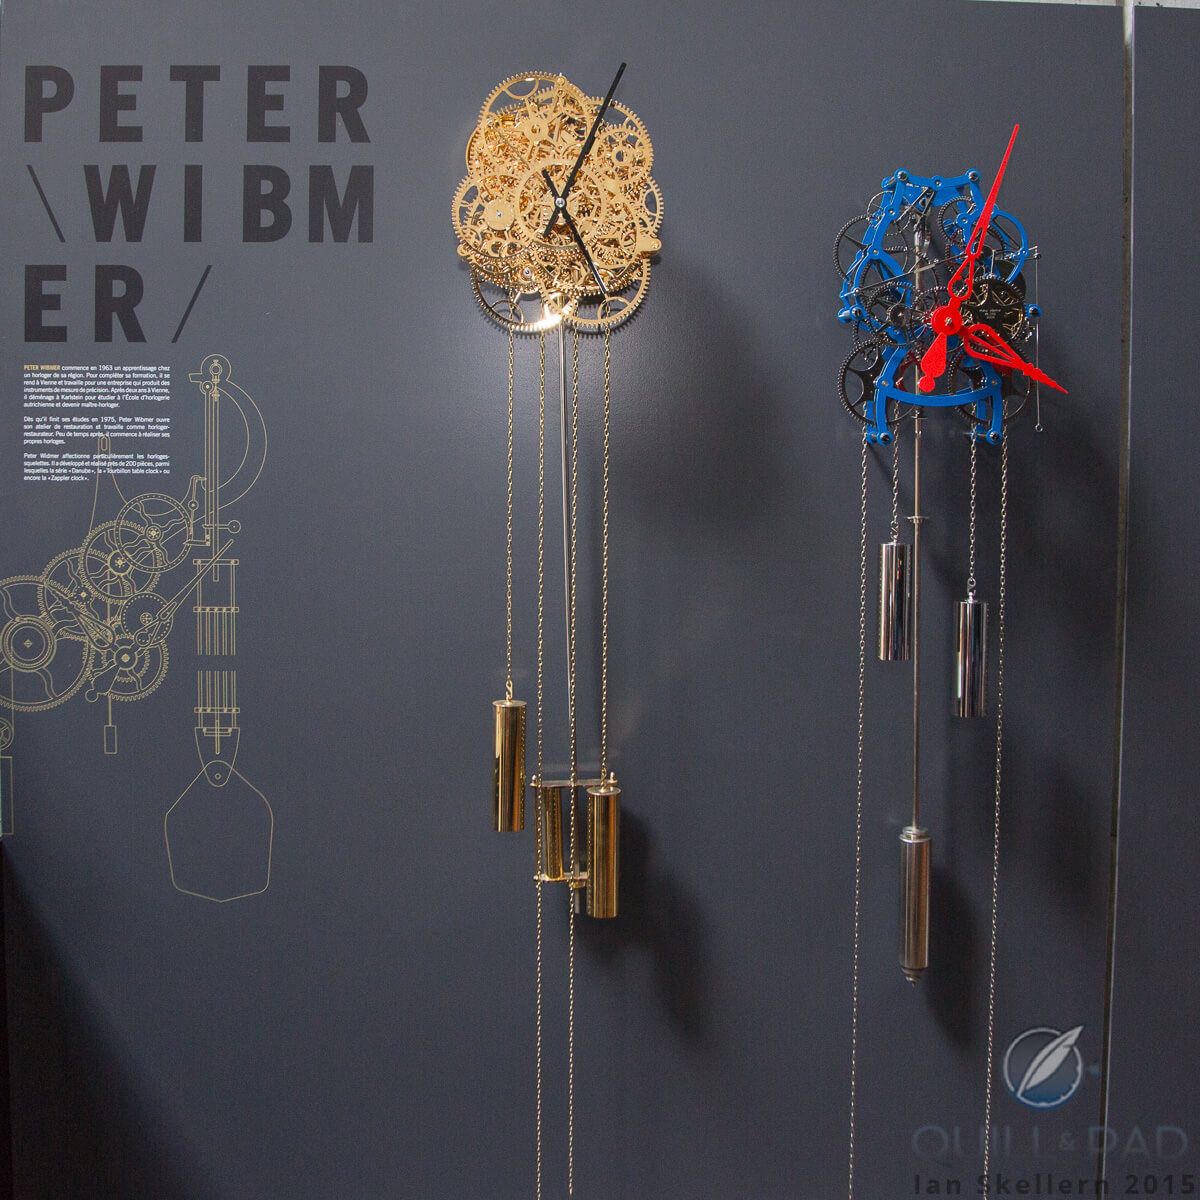 Peter Wibmer's playful clocks (that one on the right is very playful indeed – video coming soon)